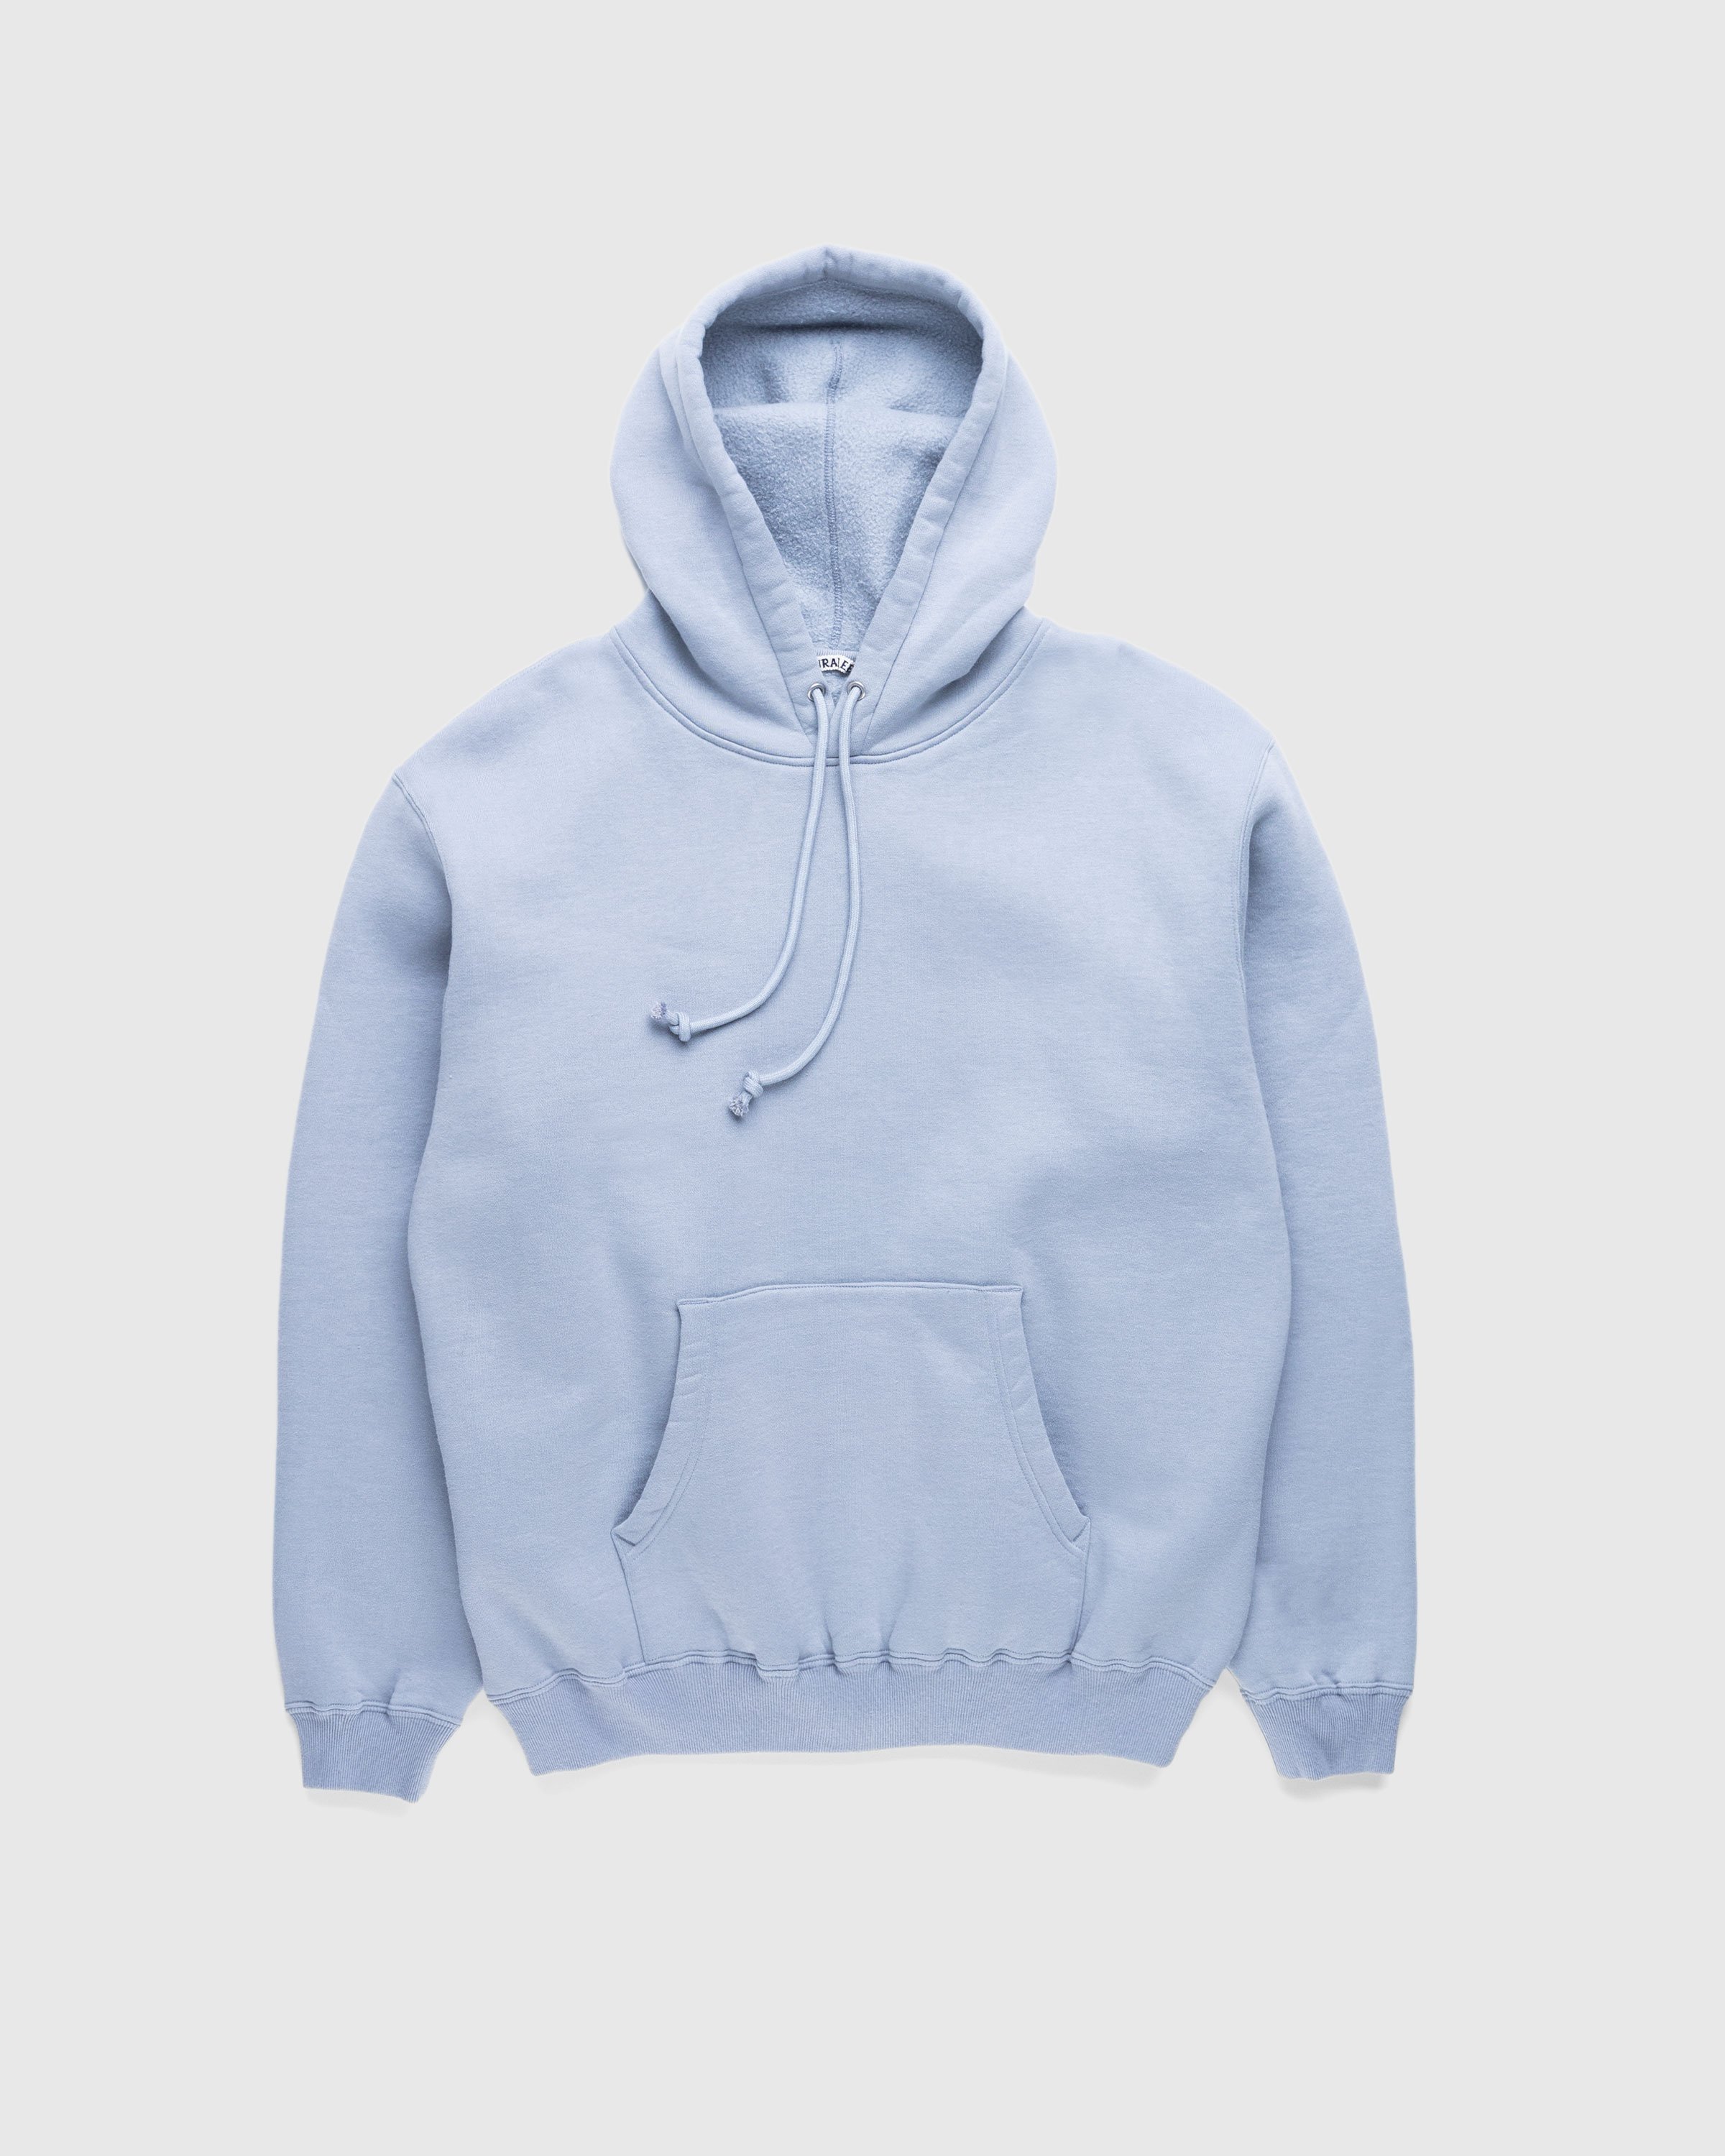 Auralee - Smooth Soft Pullover Hoodie Blue/Gray - Clothing - Blue - Image 1